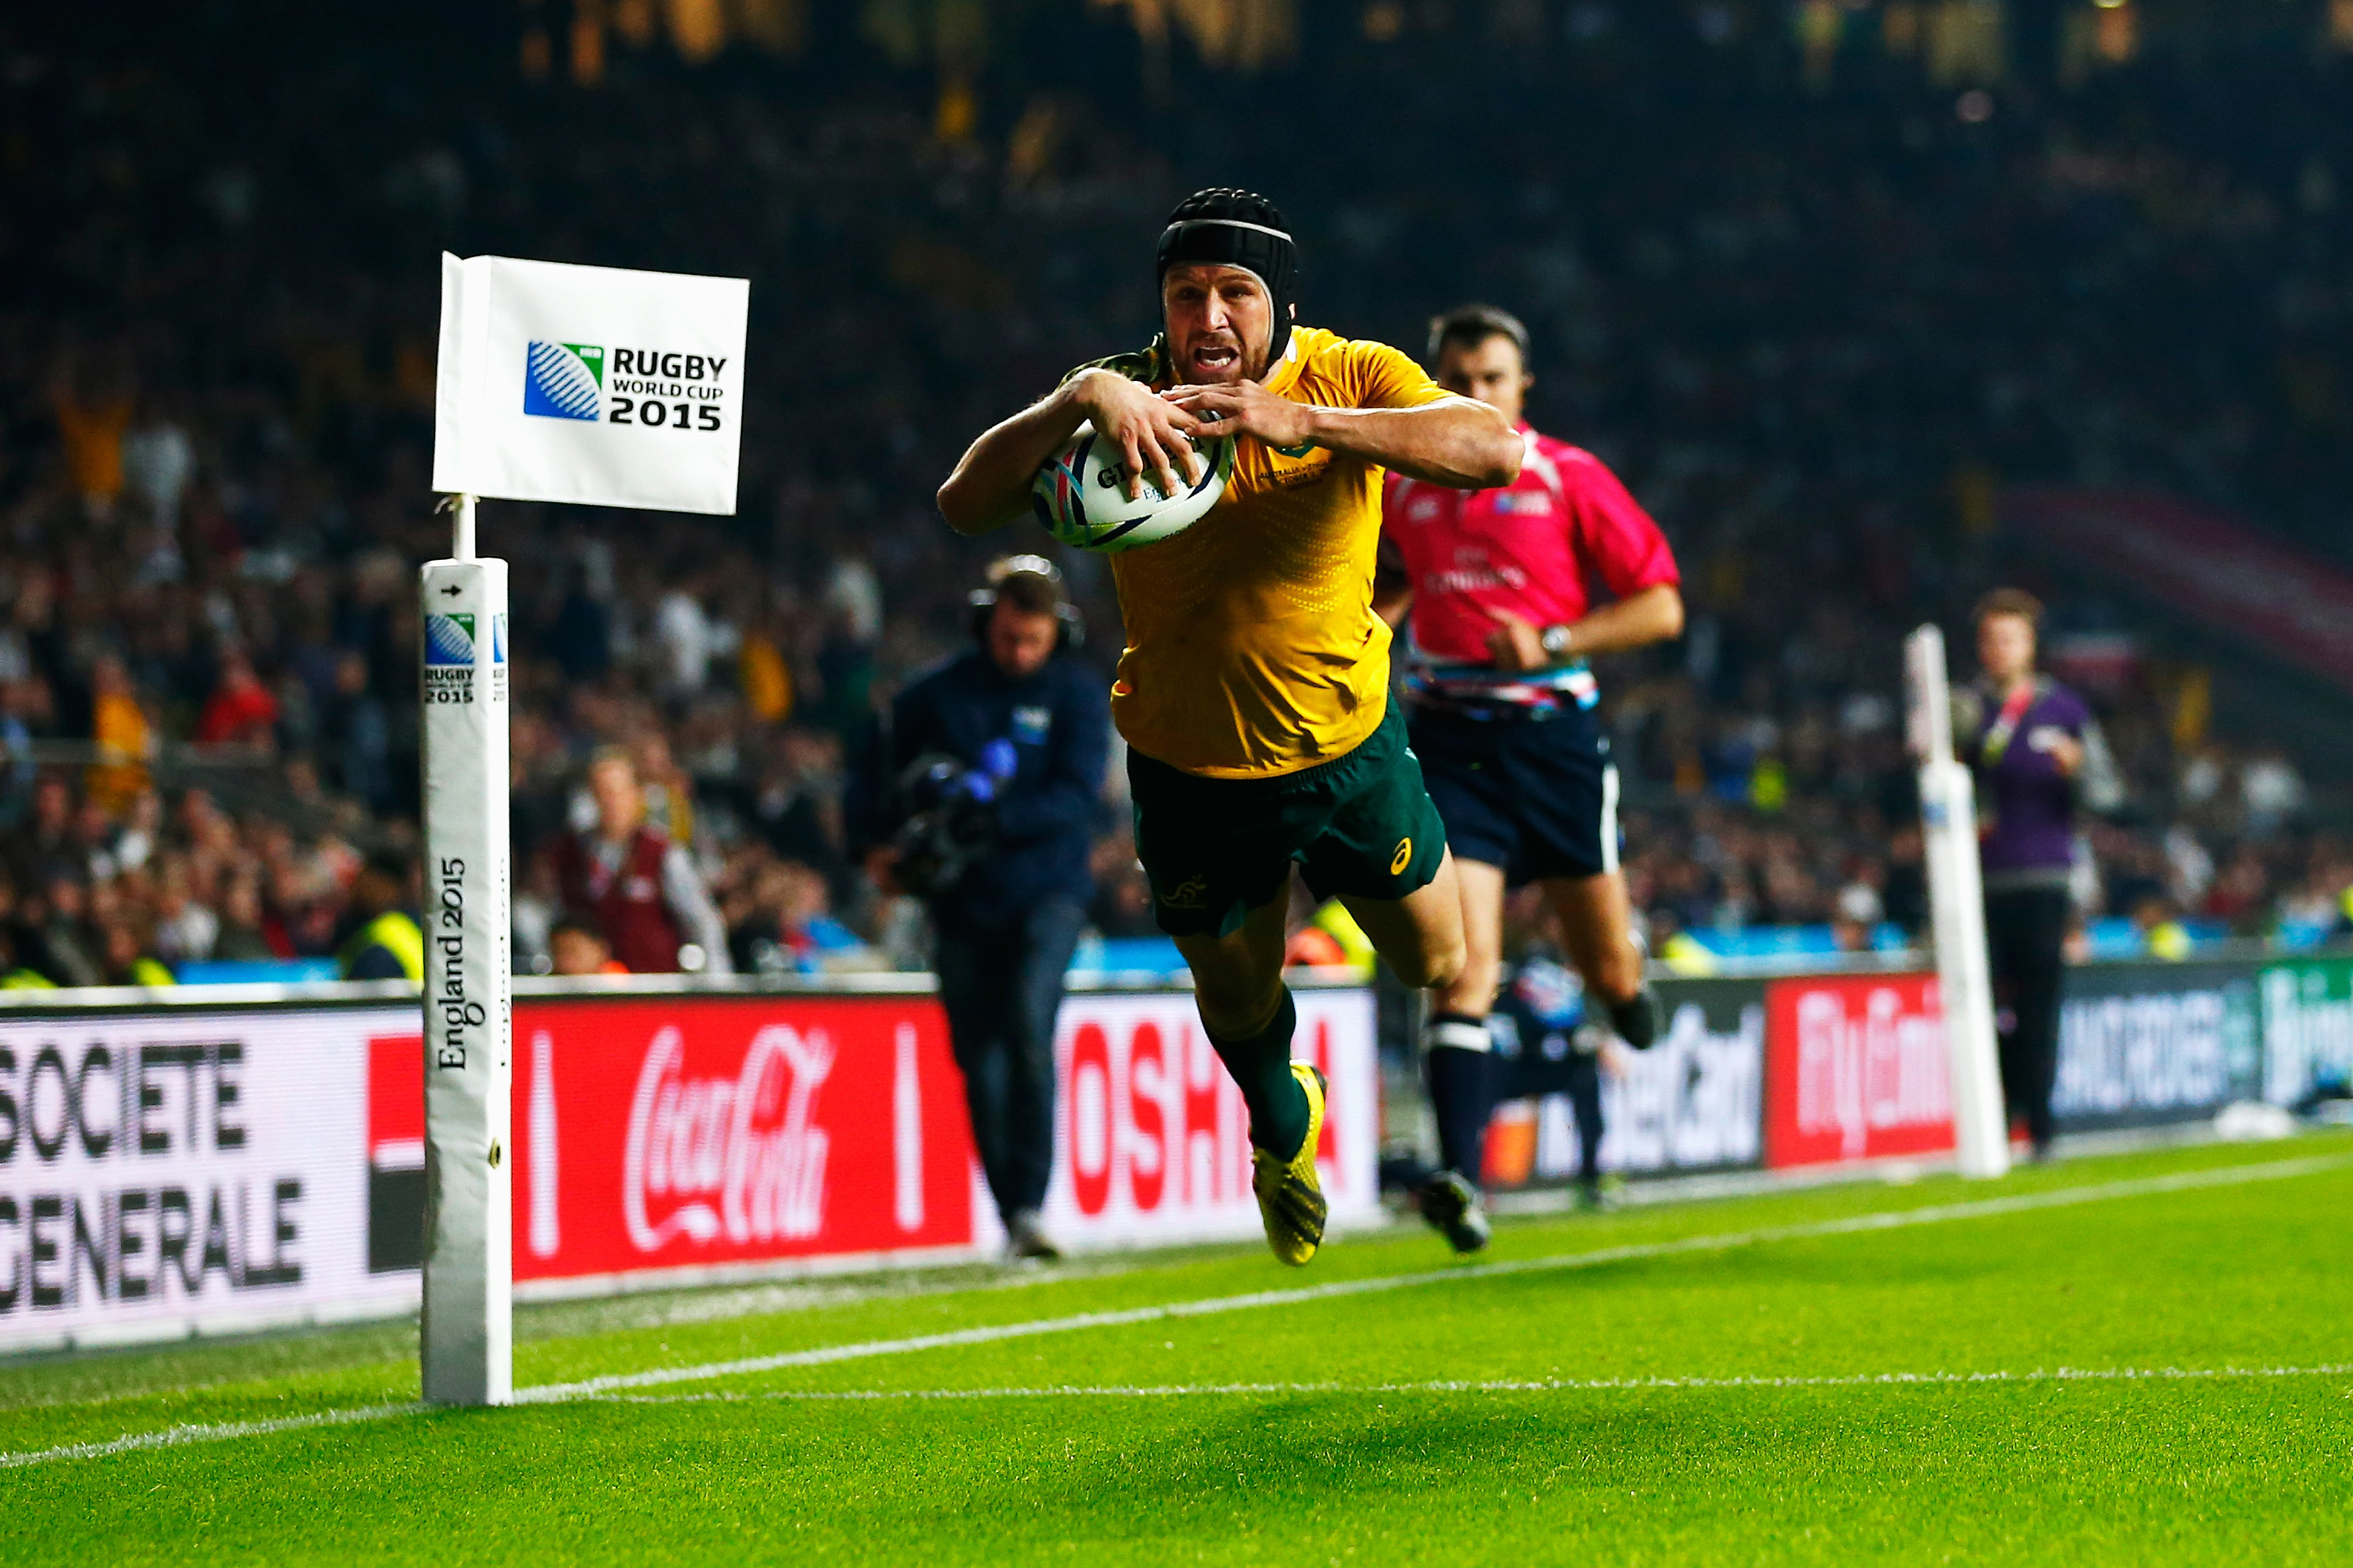 Matt Giteau scores a try against England during the 2015 Rugby World Cup.